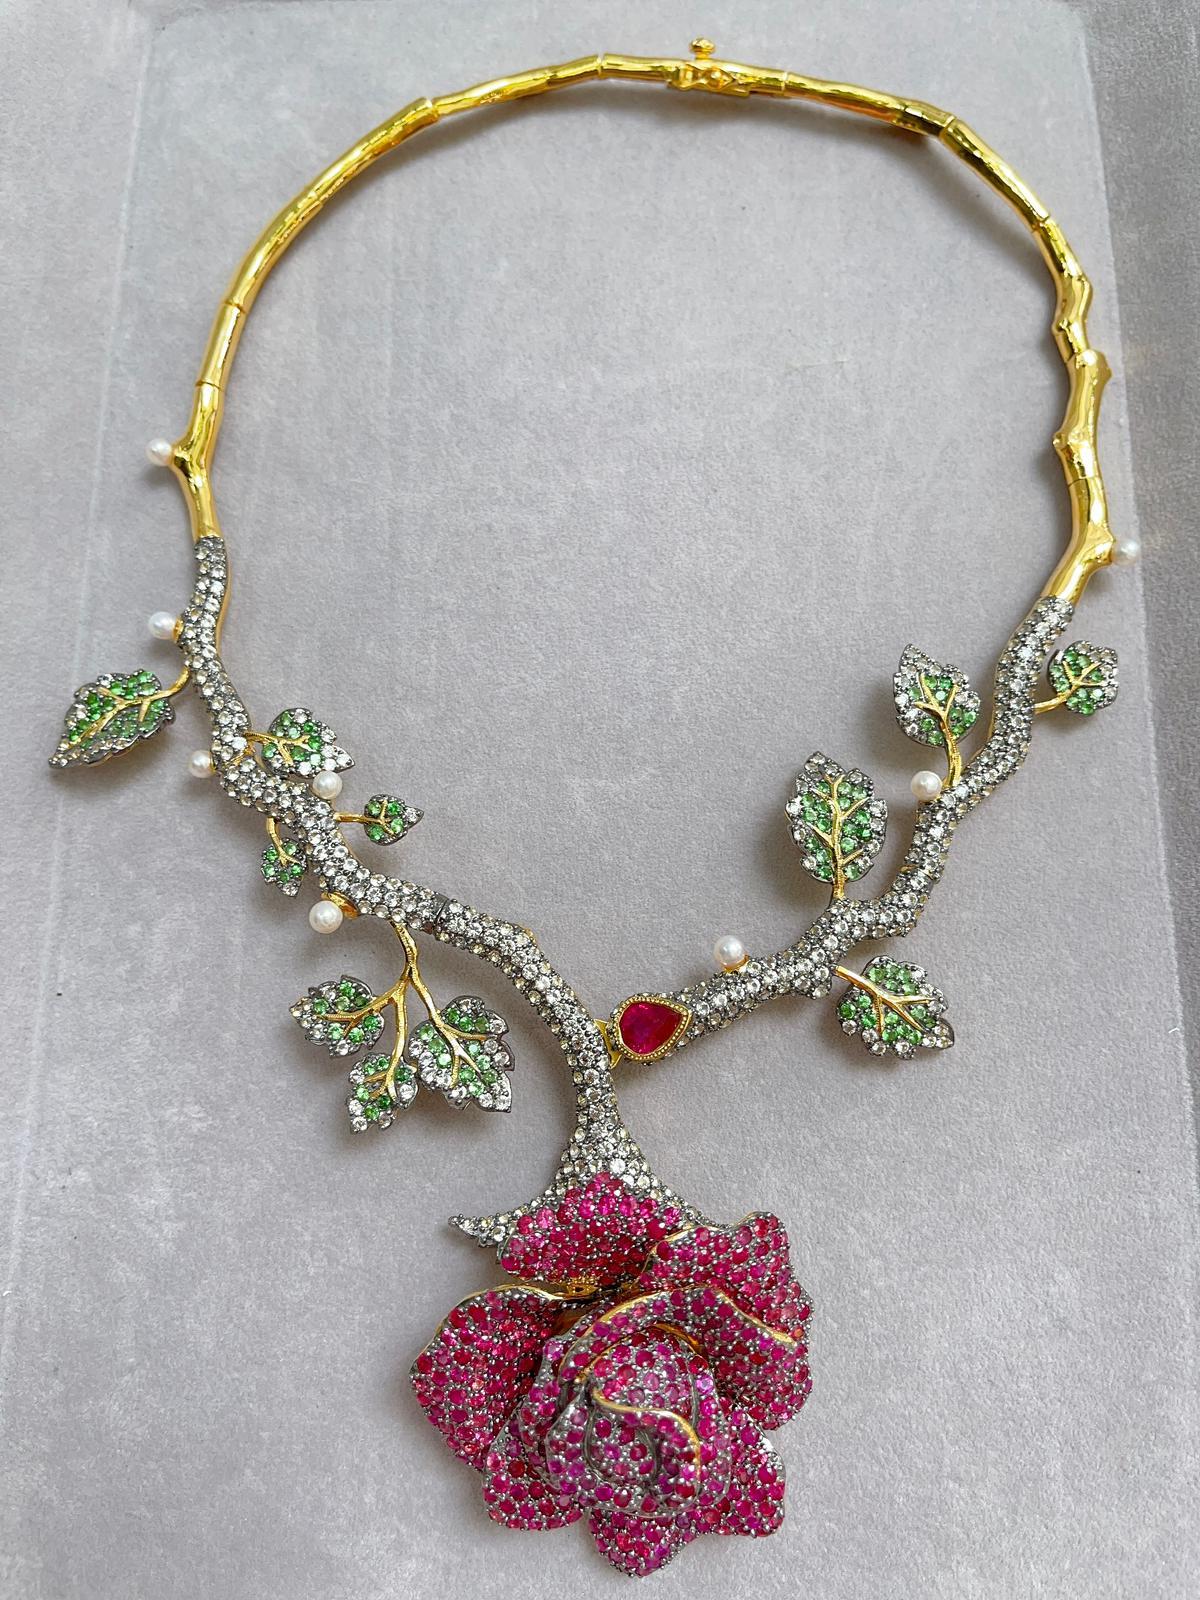 Bochic “Orient ” Ruby, Salvorite, WhiteZircon Necklace Set In 22K Gold & Silver 
Drop Necklace, Multi natural gem necklace 
Beautiful Natural Red Rubies - 9 carats
Round brilliant and pear shape 
Natural Green Color Tsavorite  - 4 carats 
Round